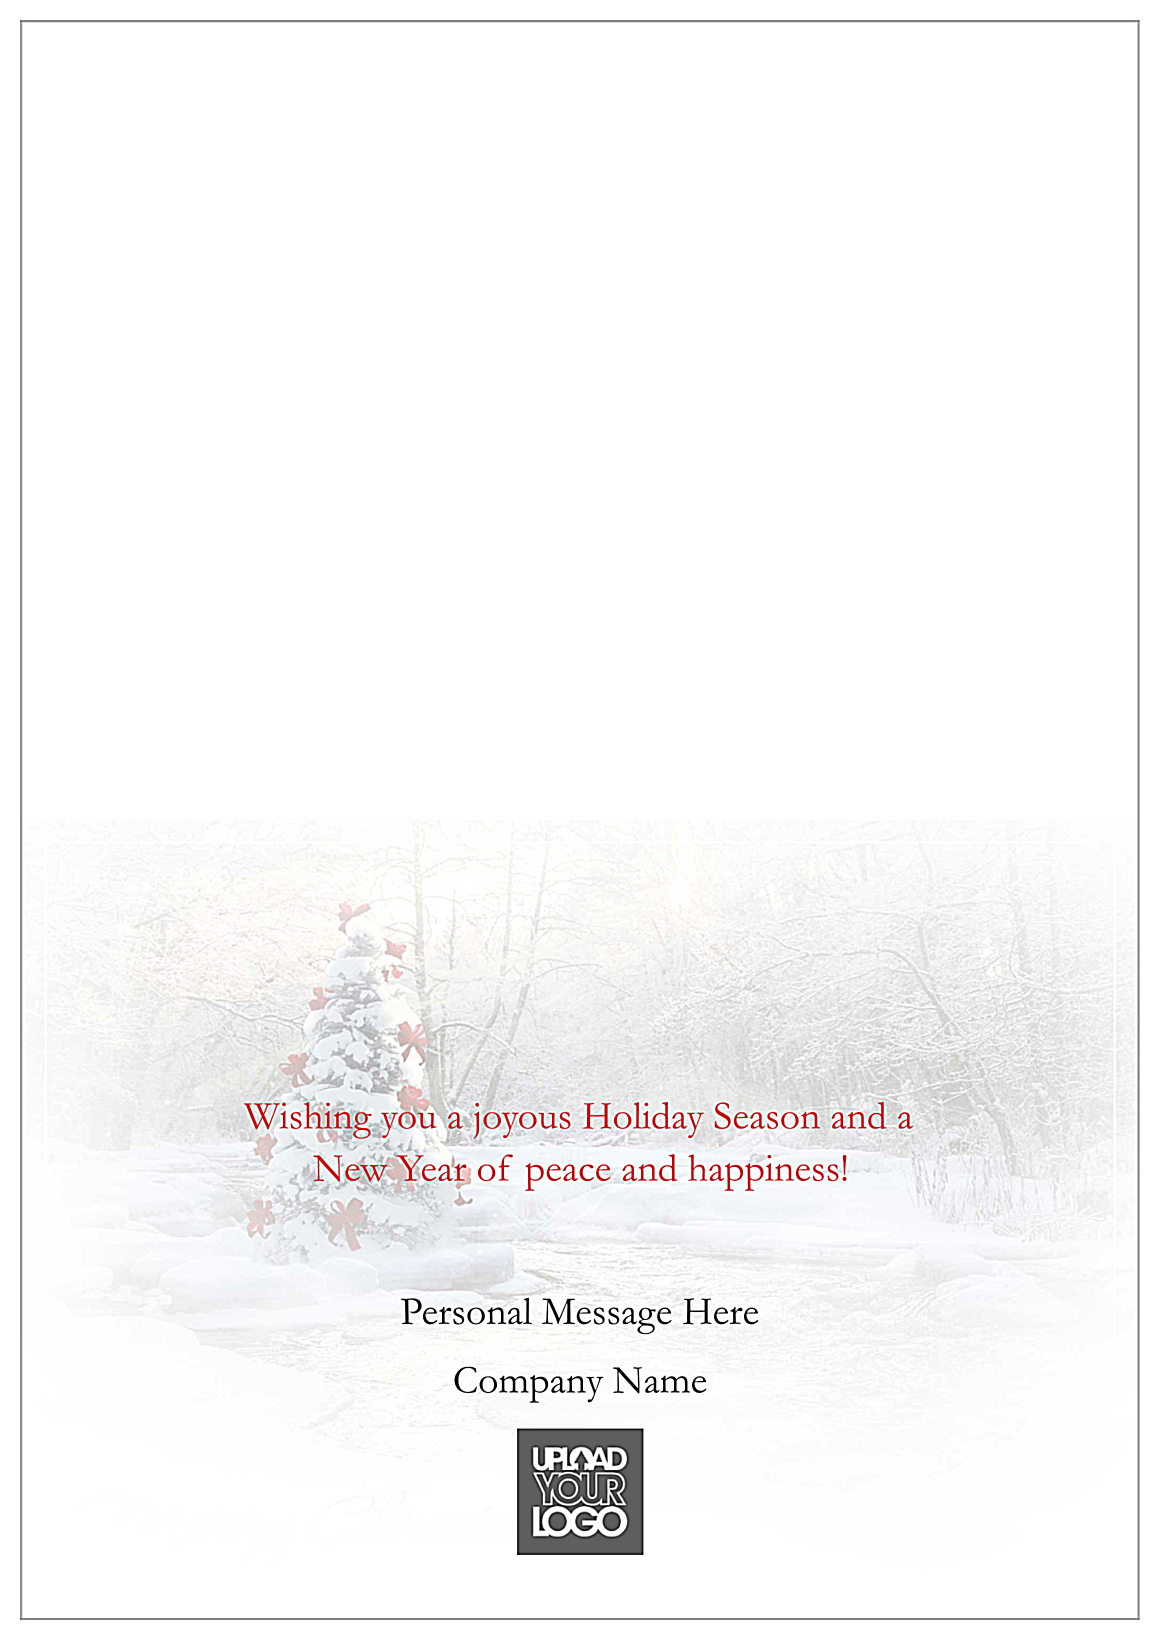 Merry Christmas Tree back - Greeting Cards Maker